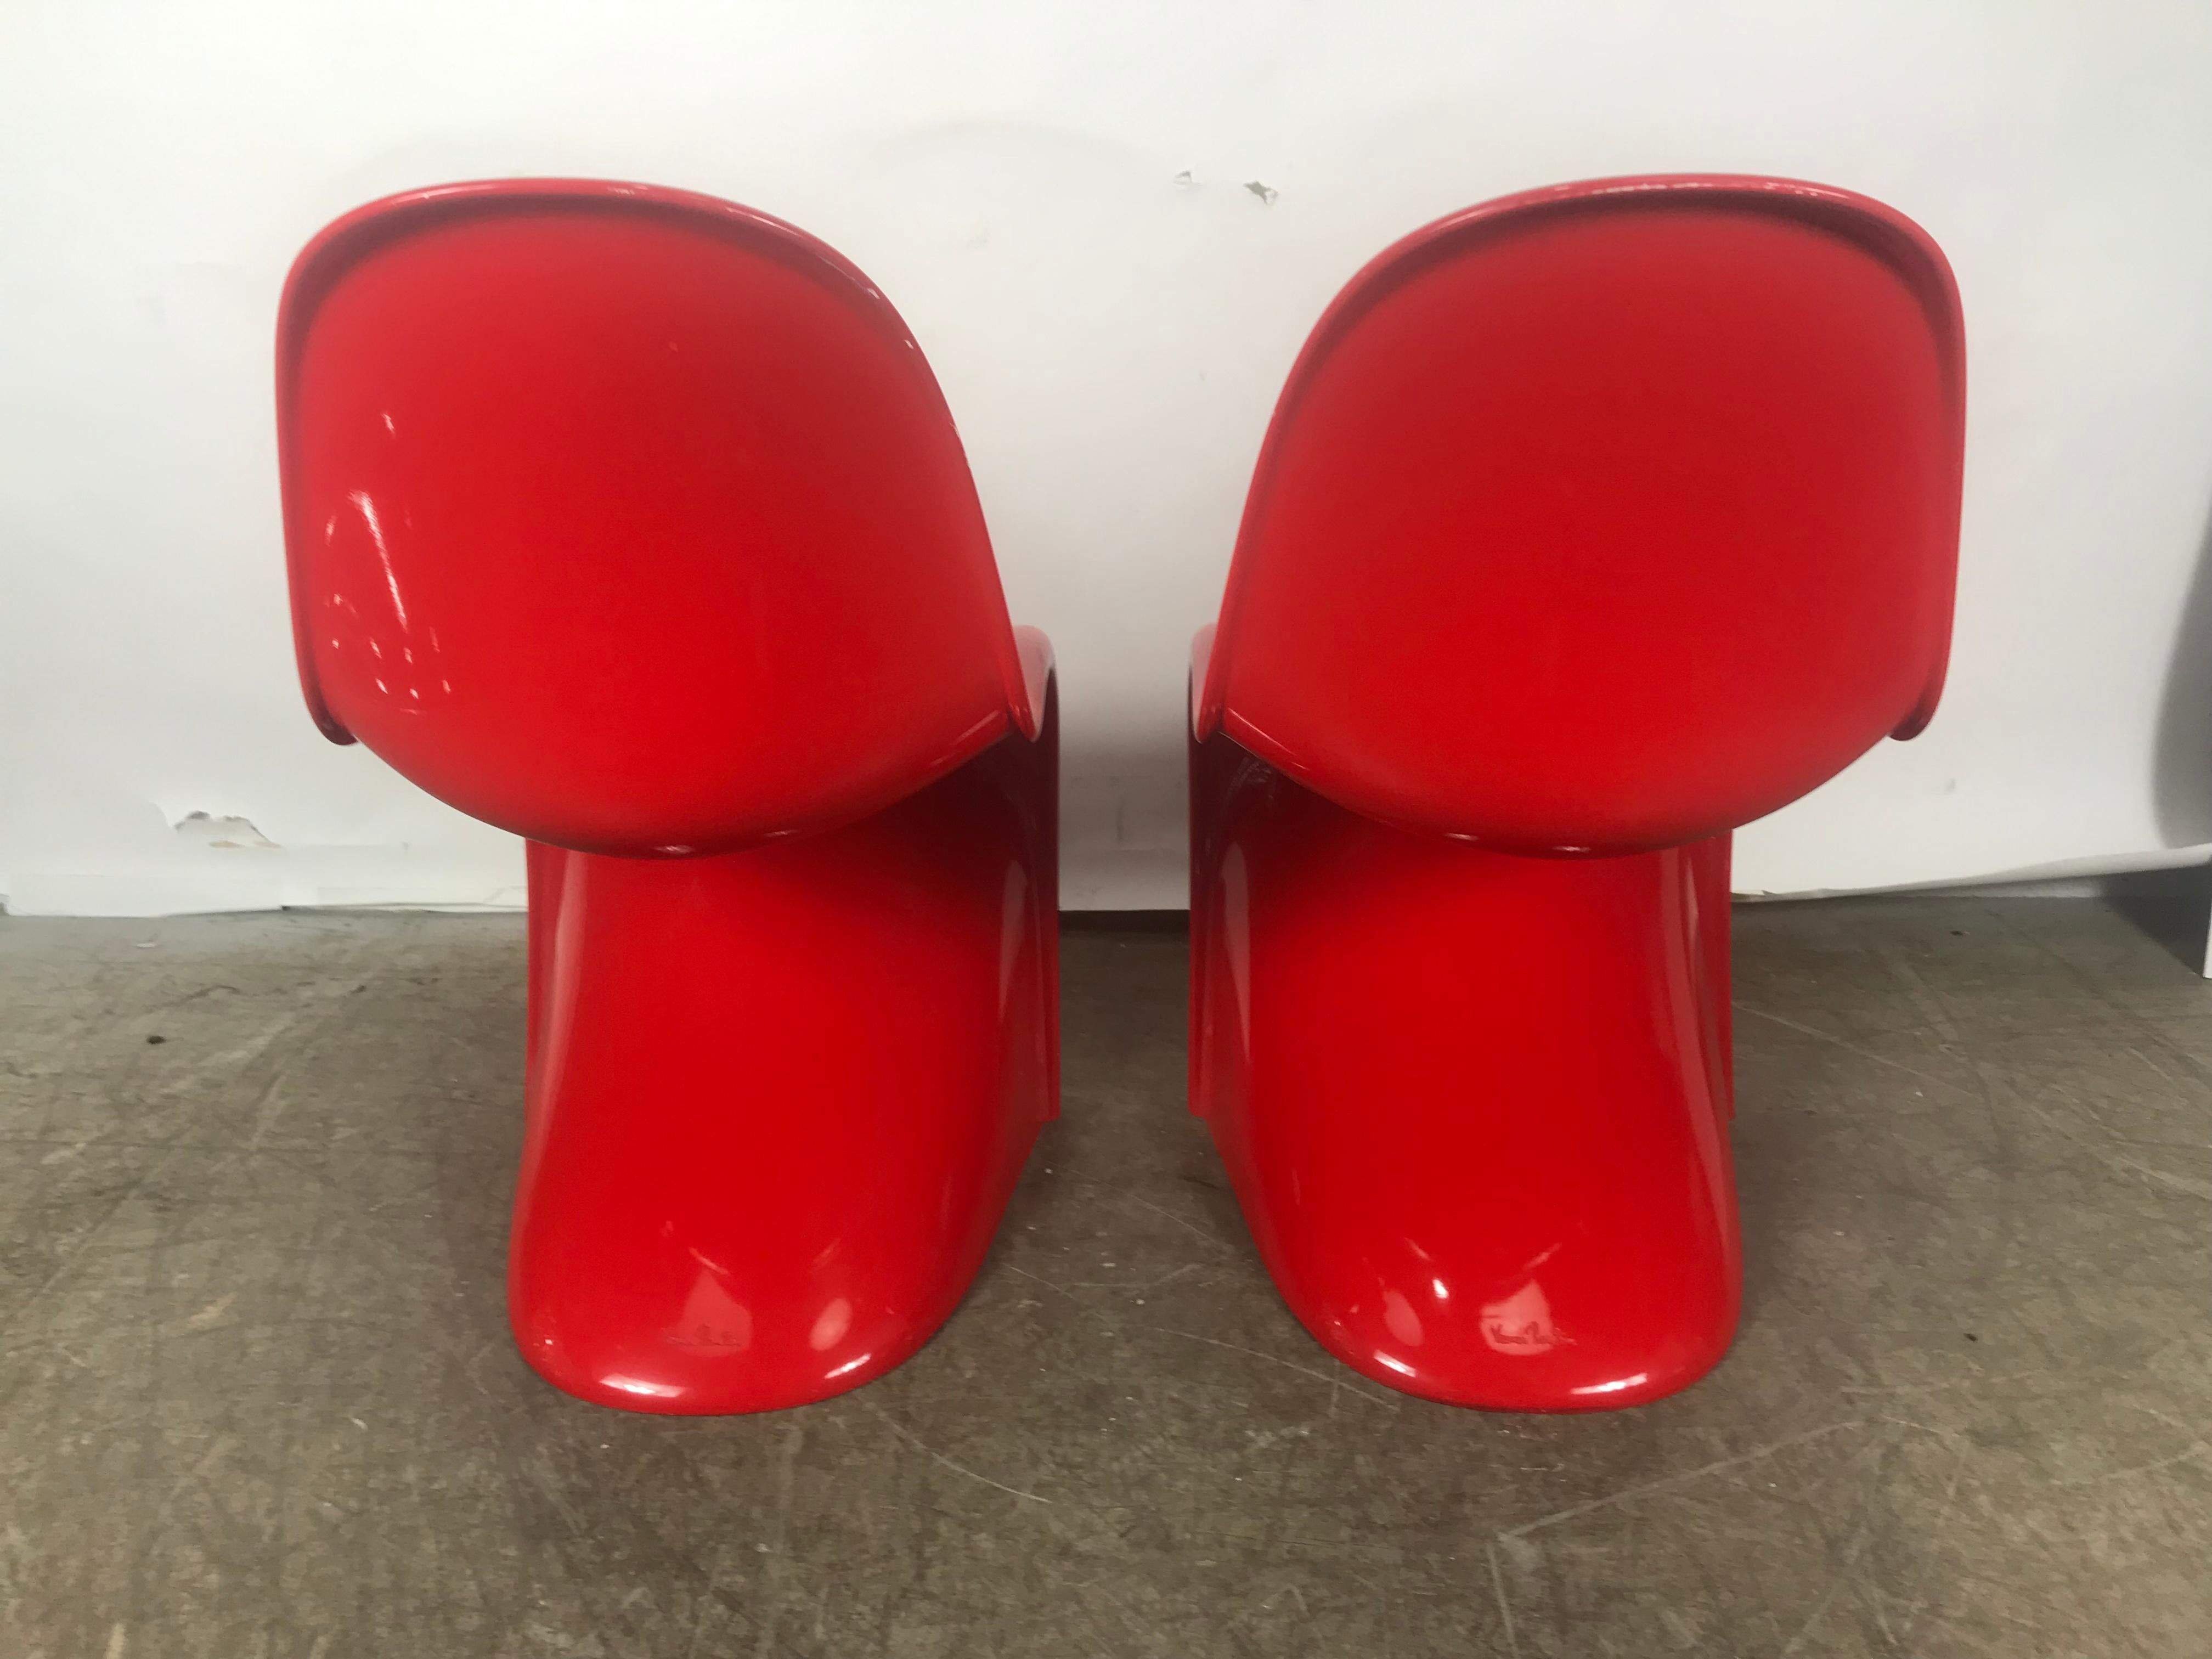 Mid-Century Modern Classic Pair of Red Molded Plastic 'S' Chairs by Verner Panton for Vitra